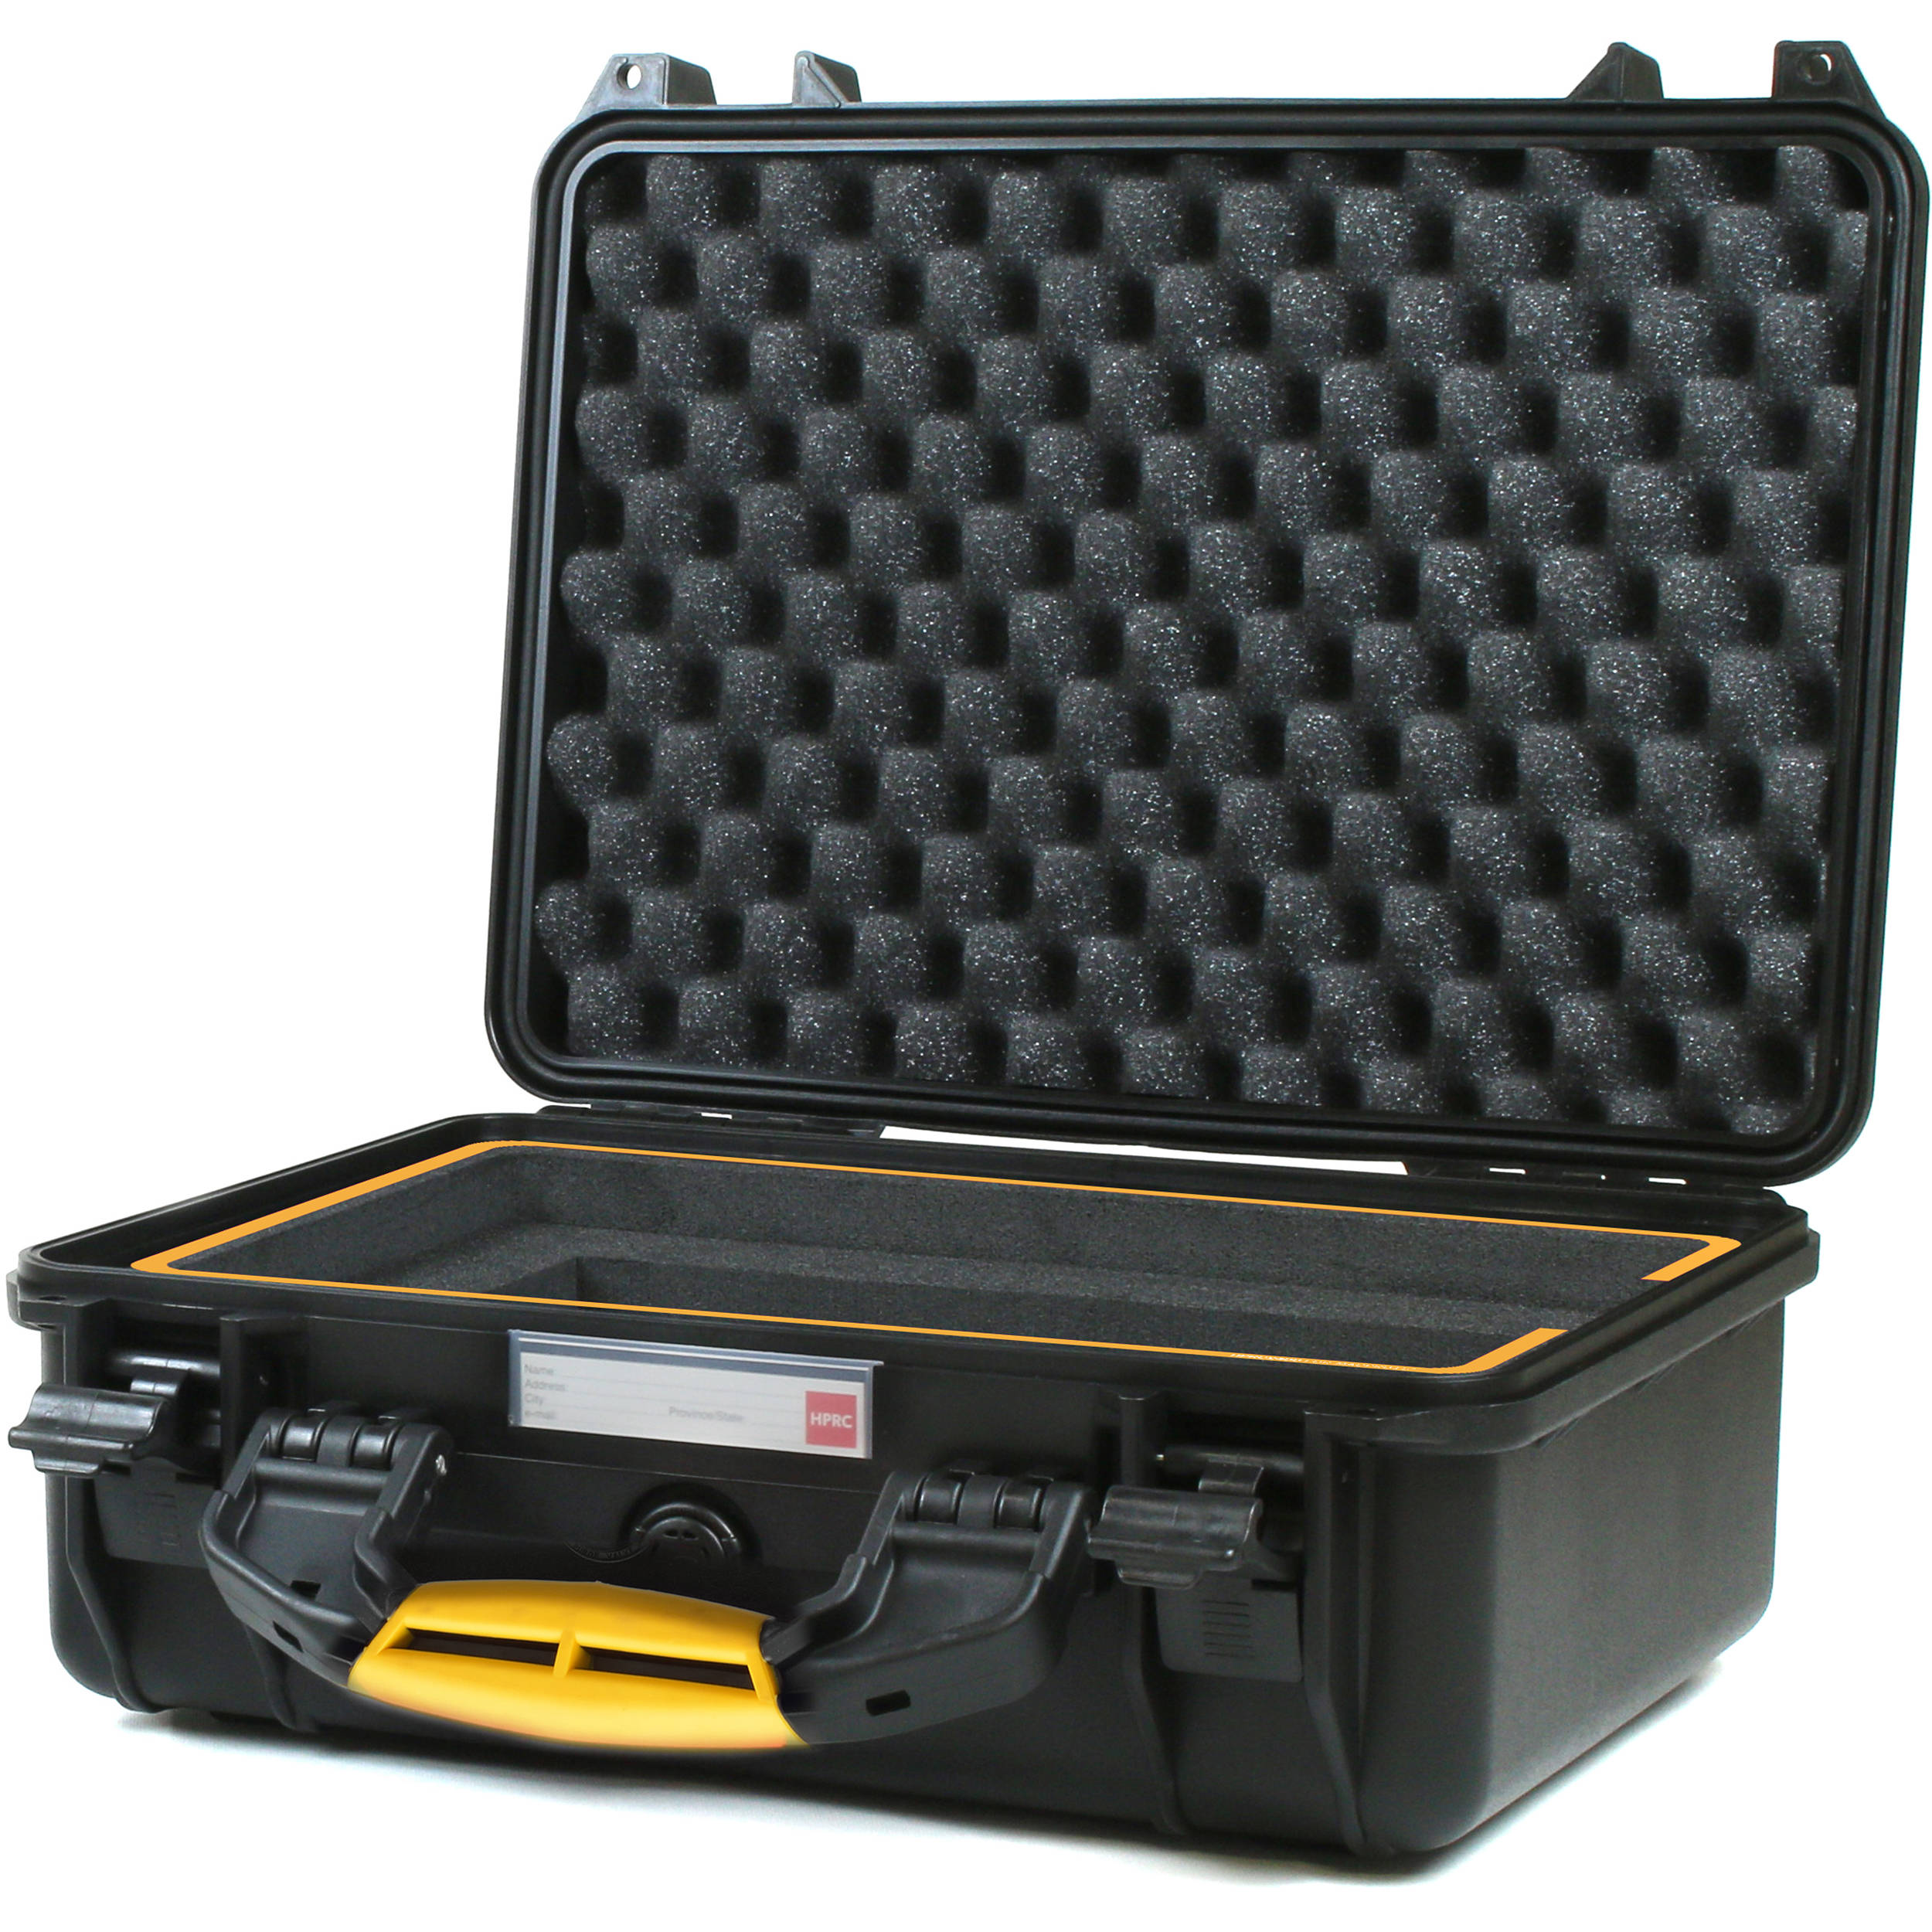 case luggage and accessories